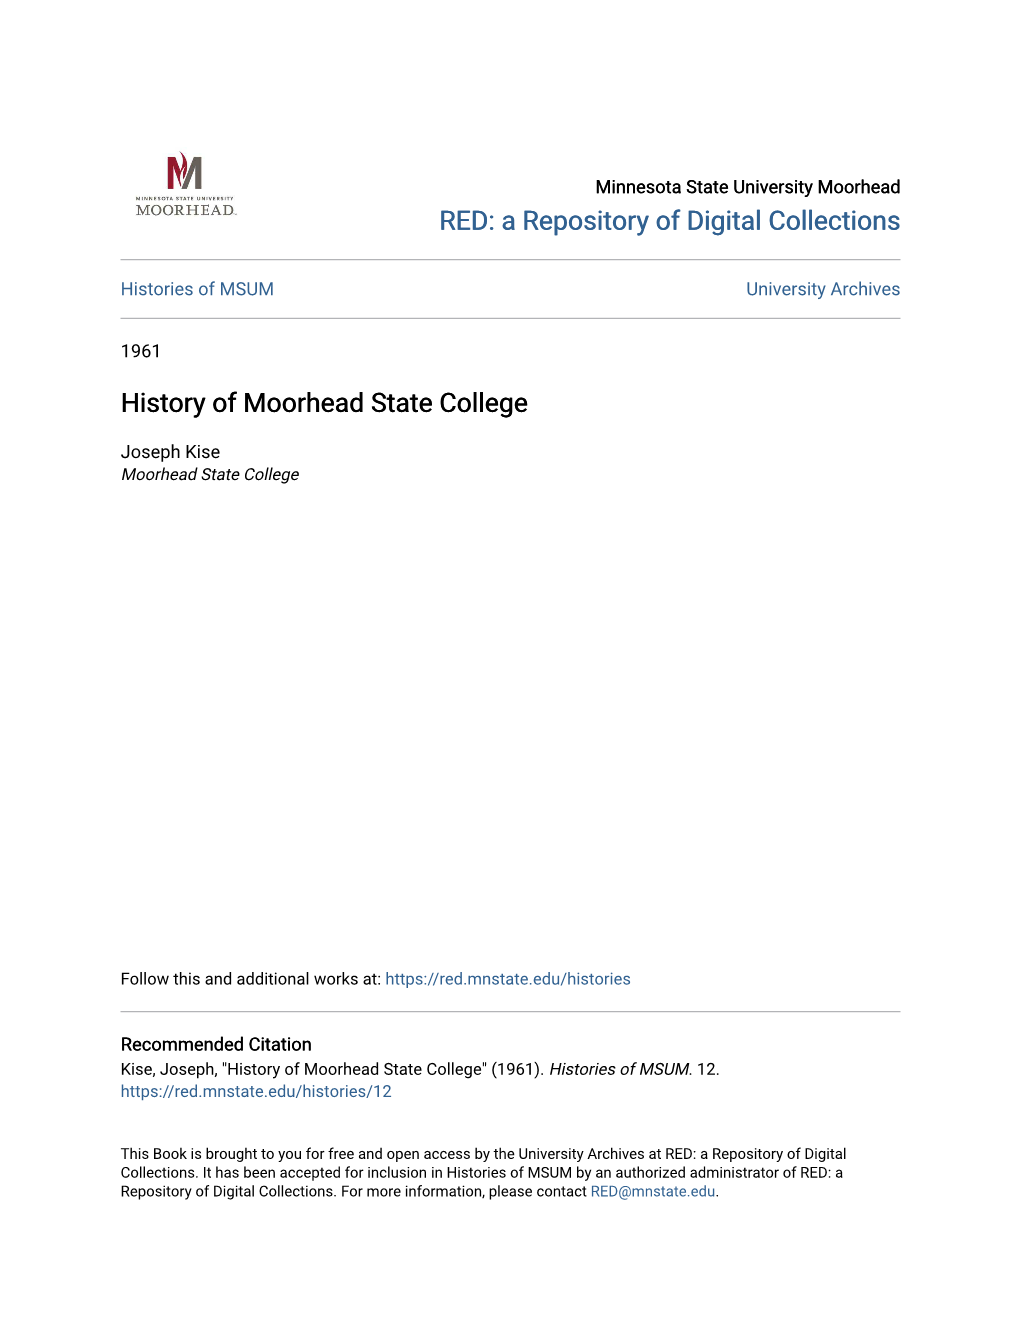 History of Moorhead State College